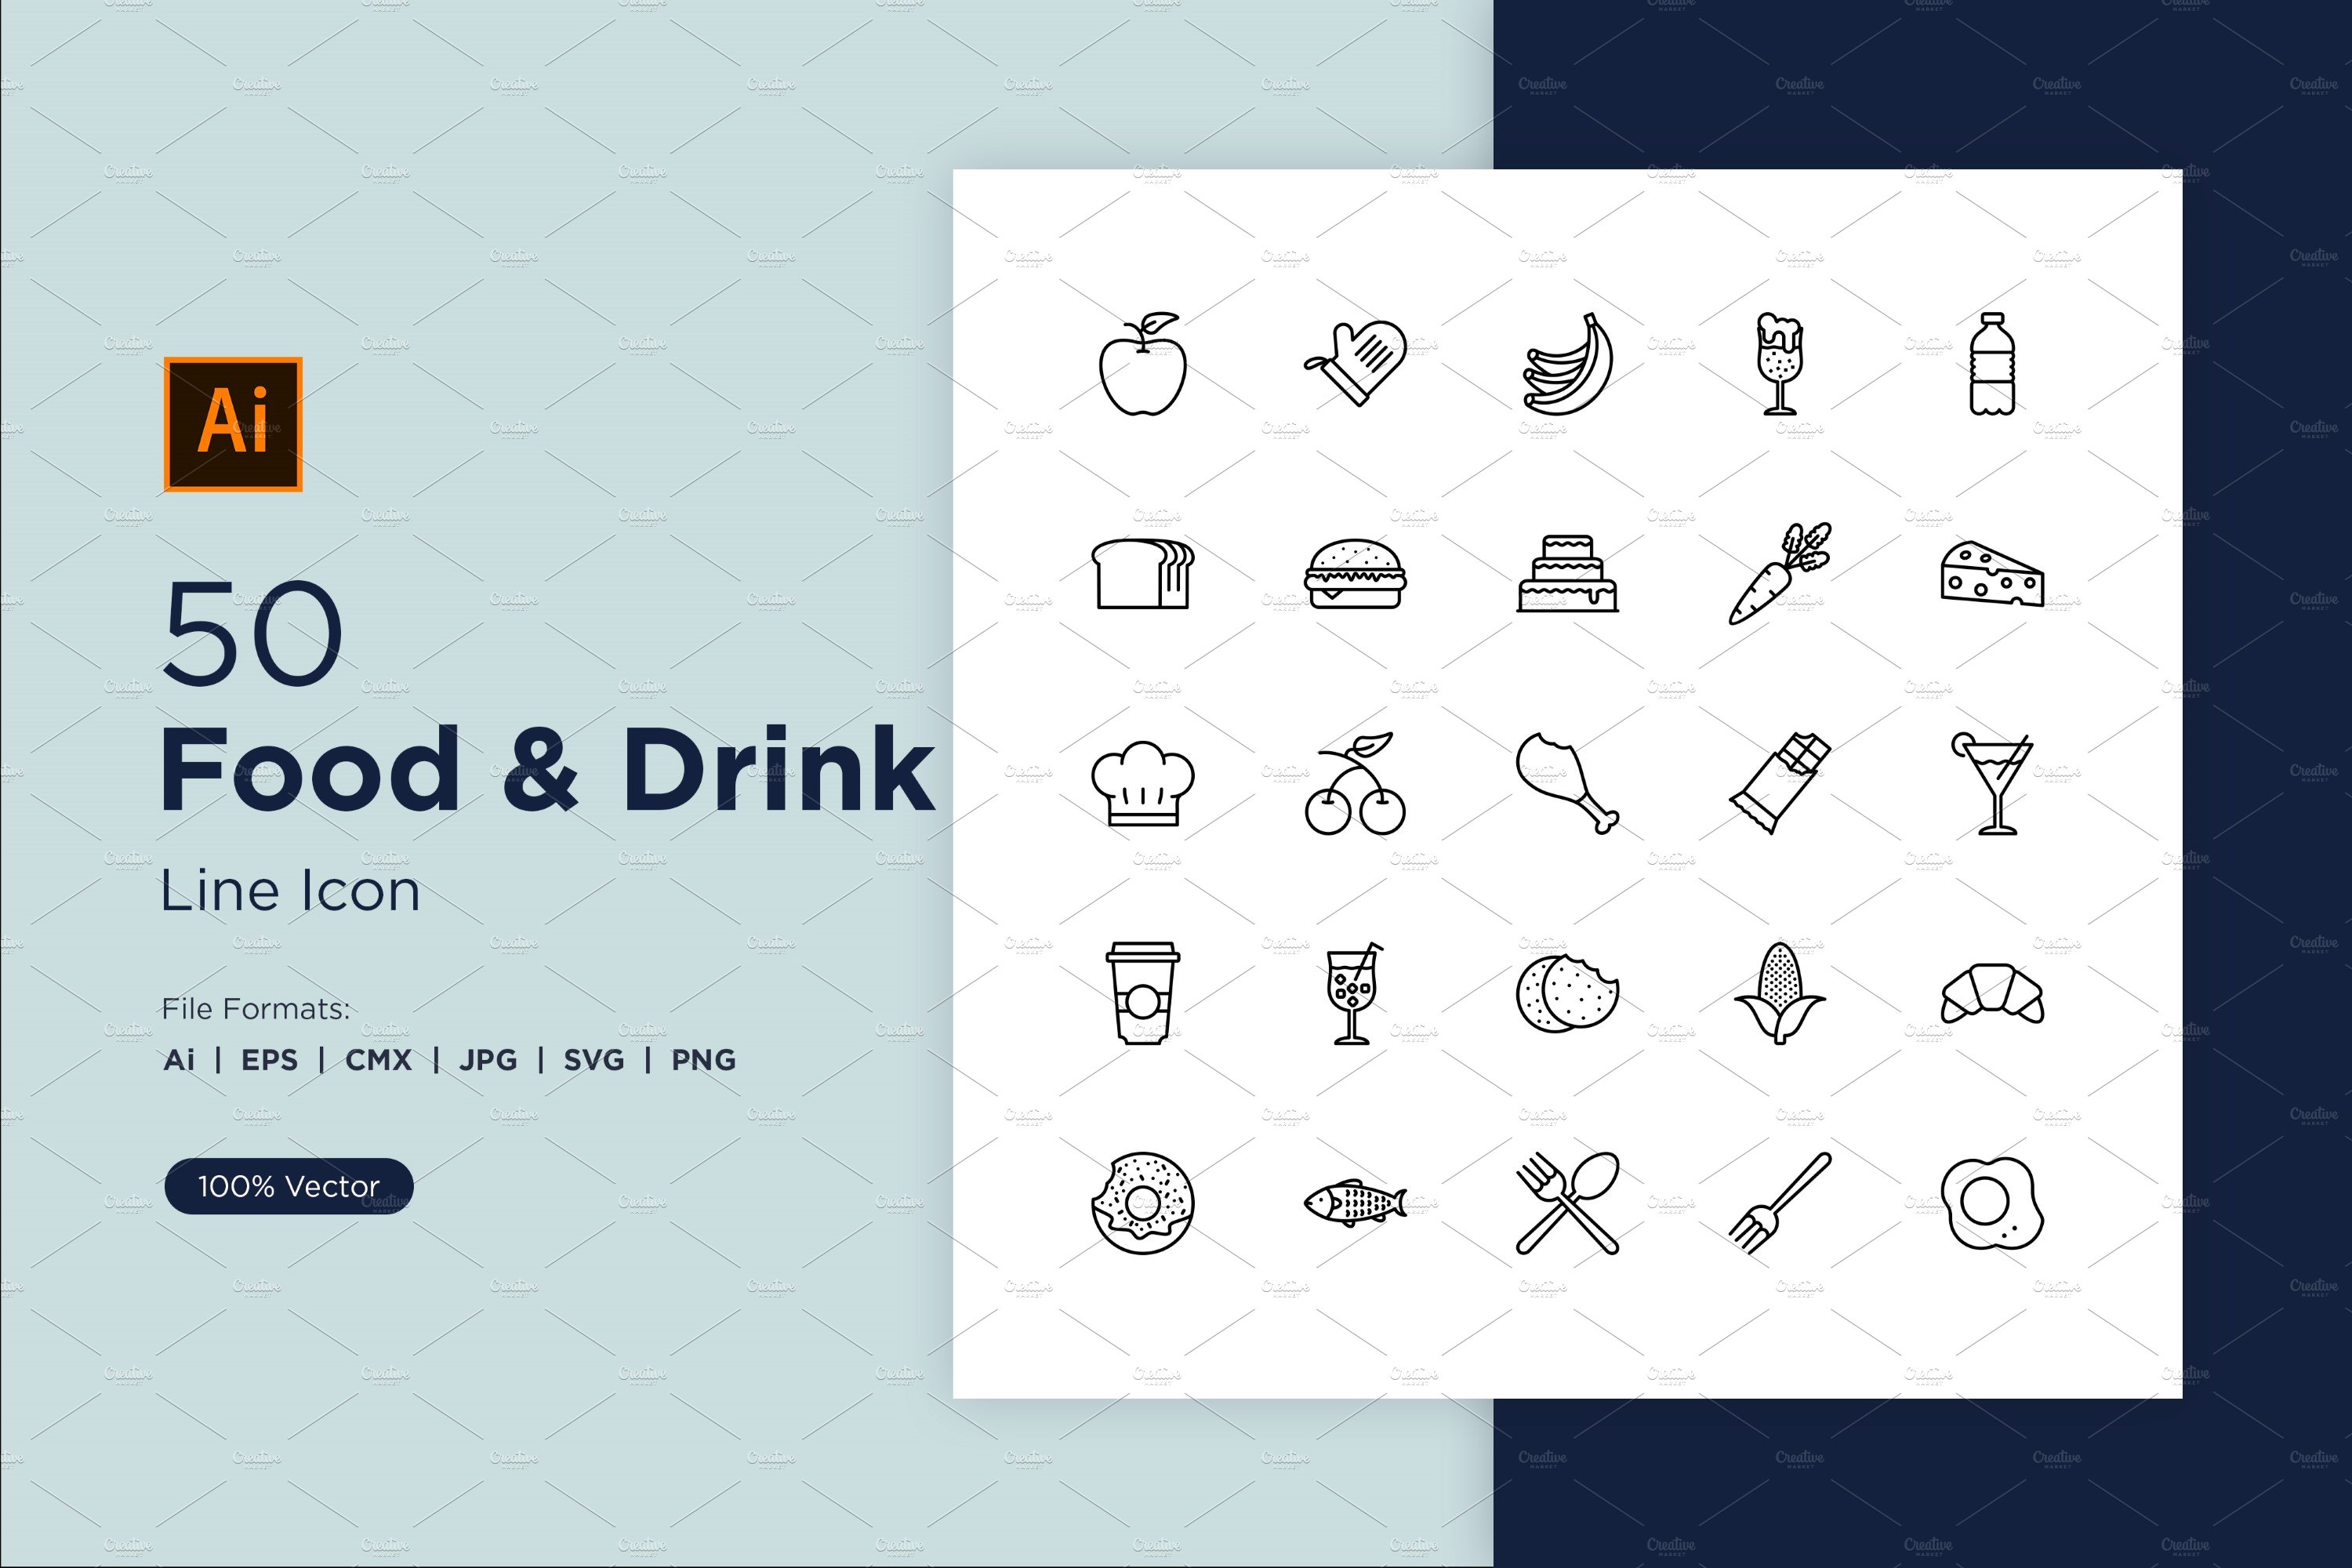 50 Food & Drinks Line icon Set cover image.